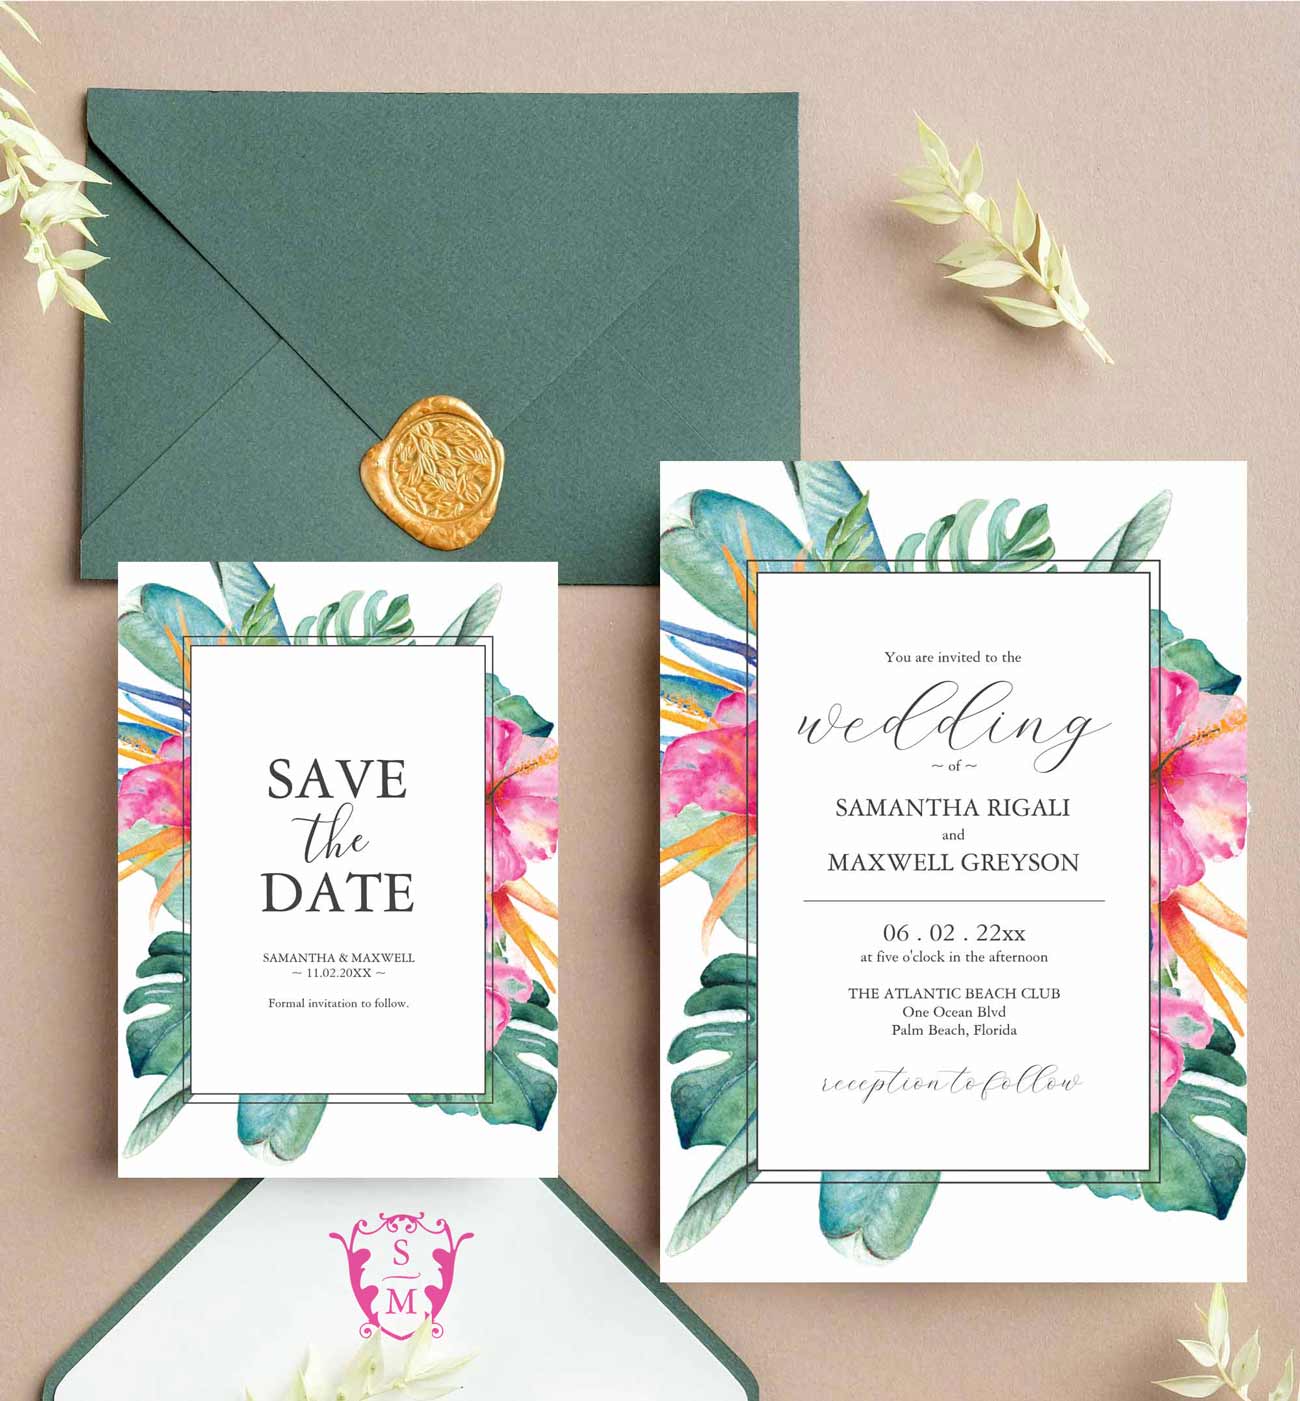 Tropical destination wedding invitation theme features unique watercolor pink and orange flowers with palm leaves. Click to see the full wedding stationery theme.